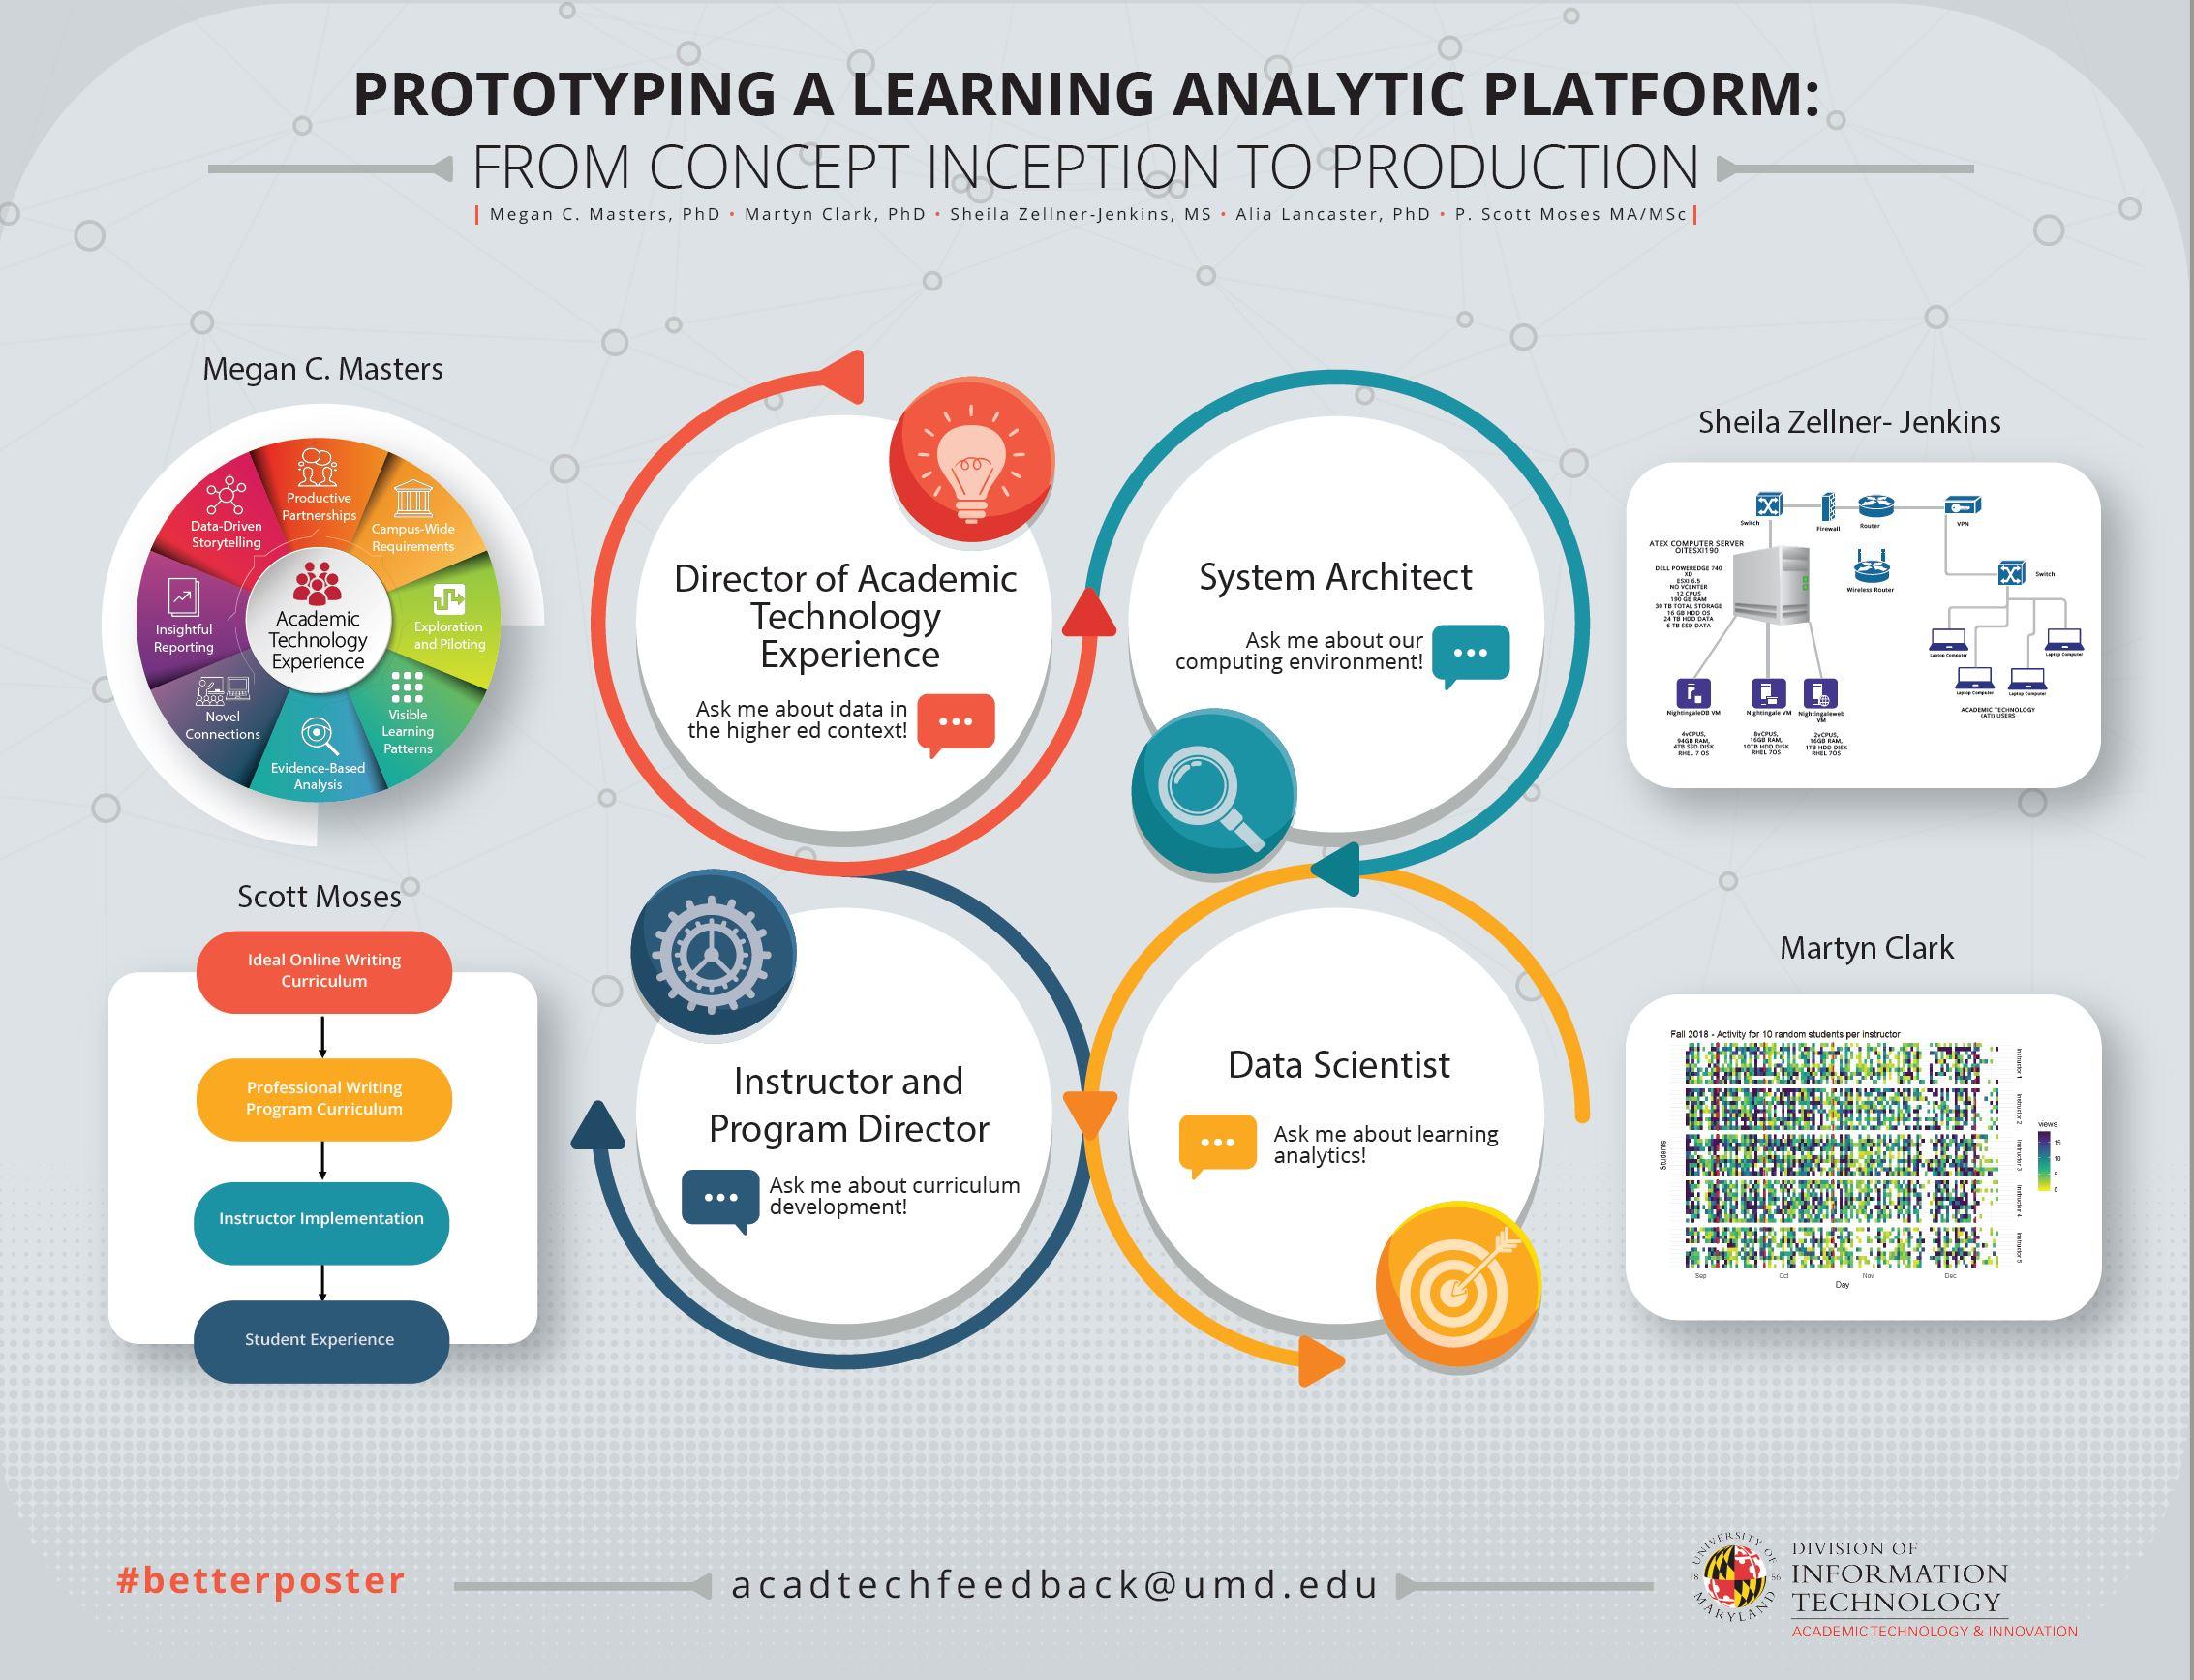 Conference poster entitled prototyping a learning analytic platform.